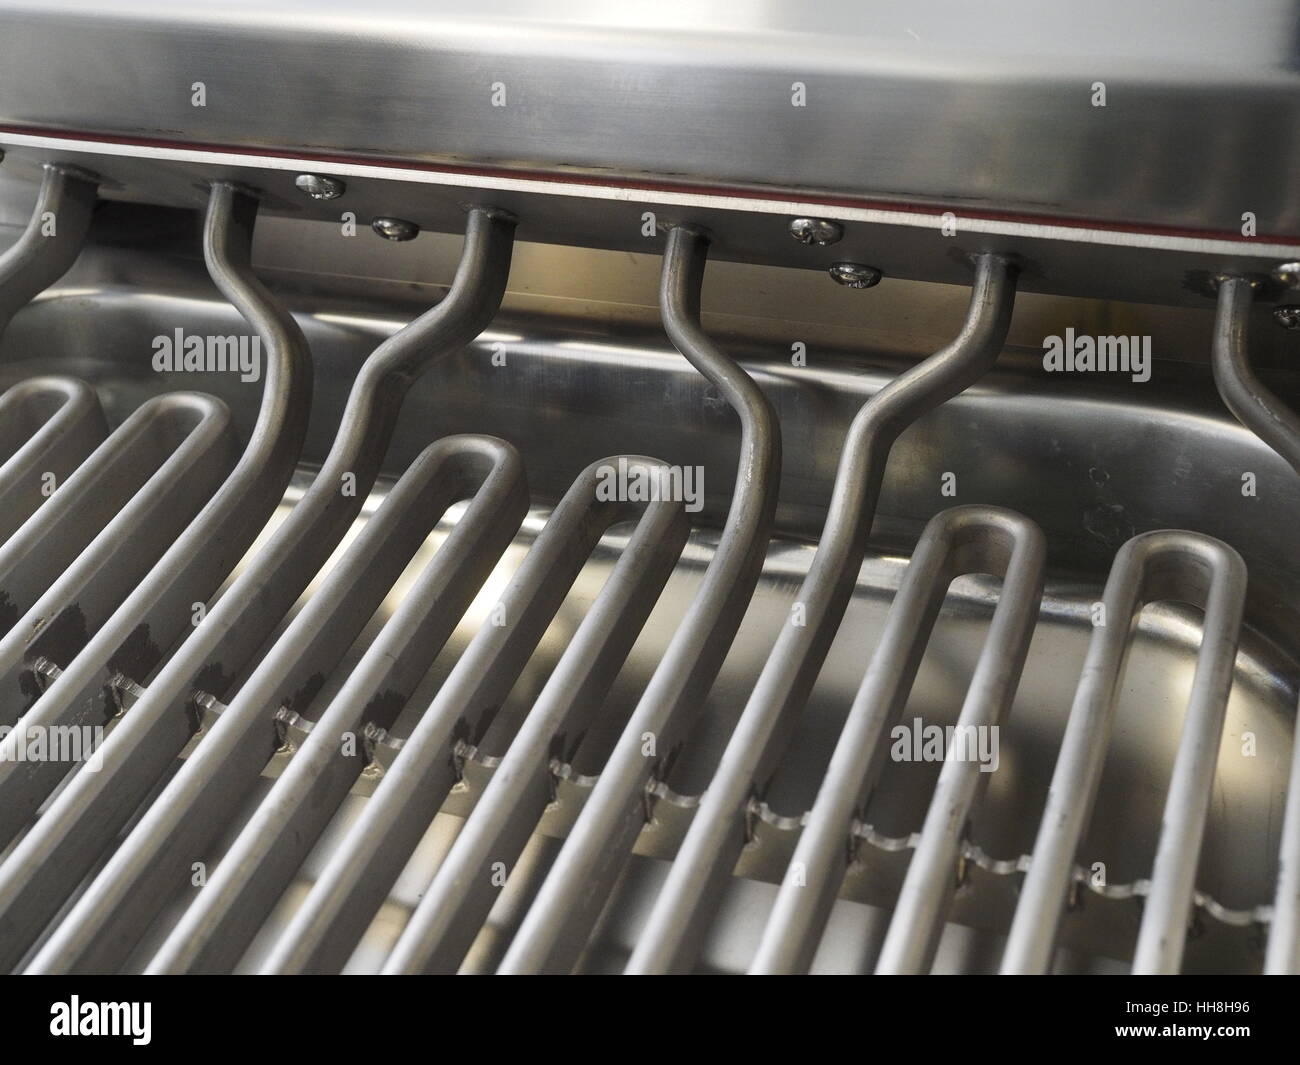 Industrial kitchen appliances for industrial kitchens; fryer detail, electric heater element Stock Photo